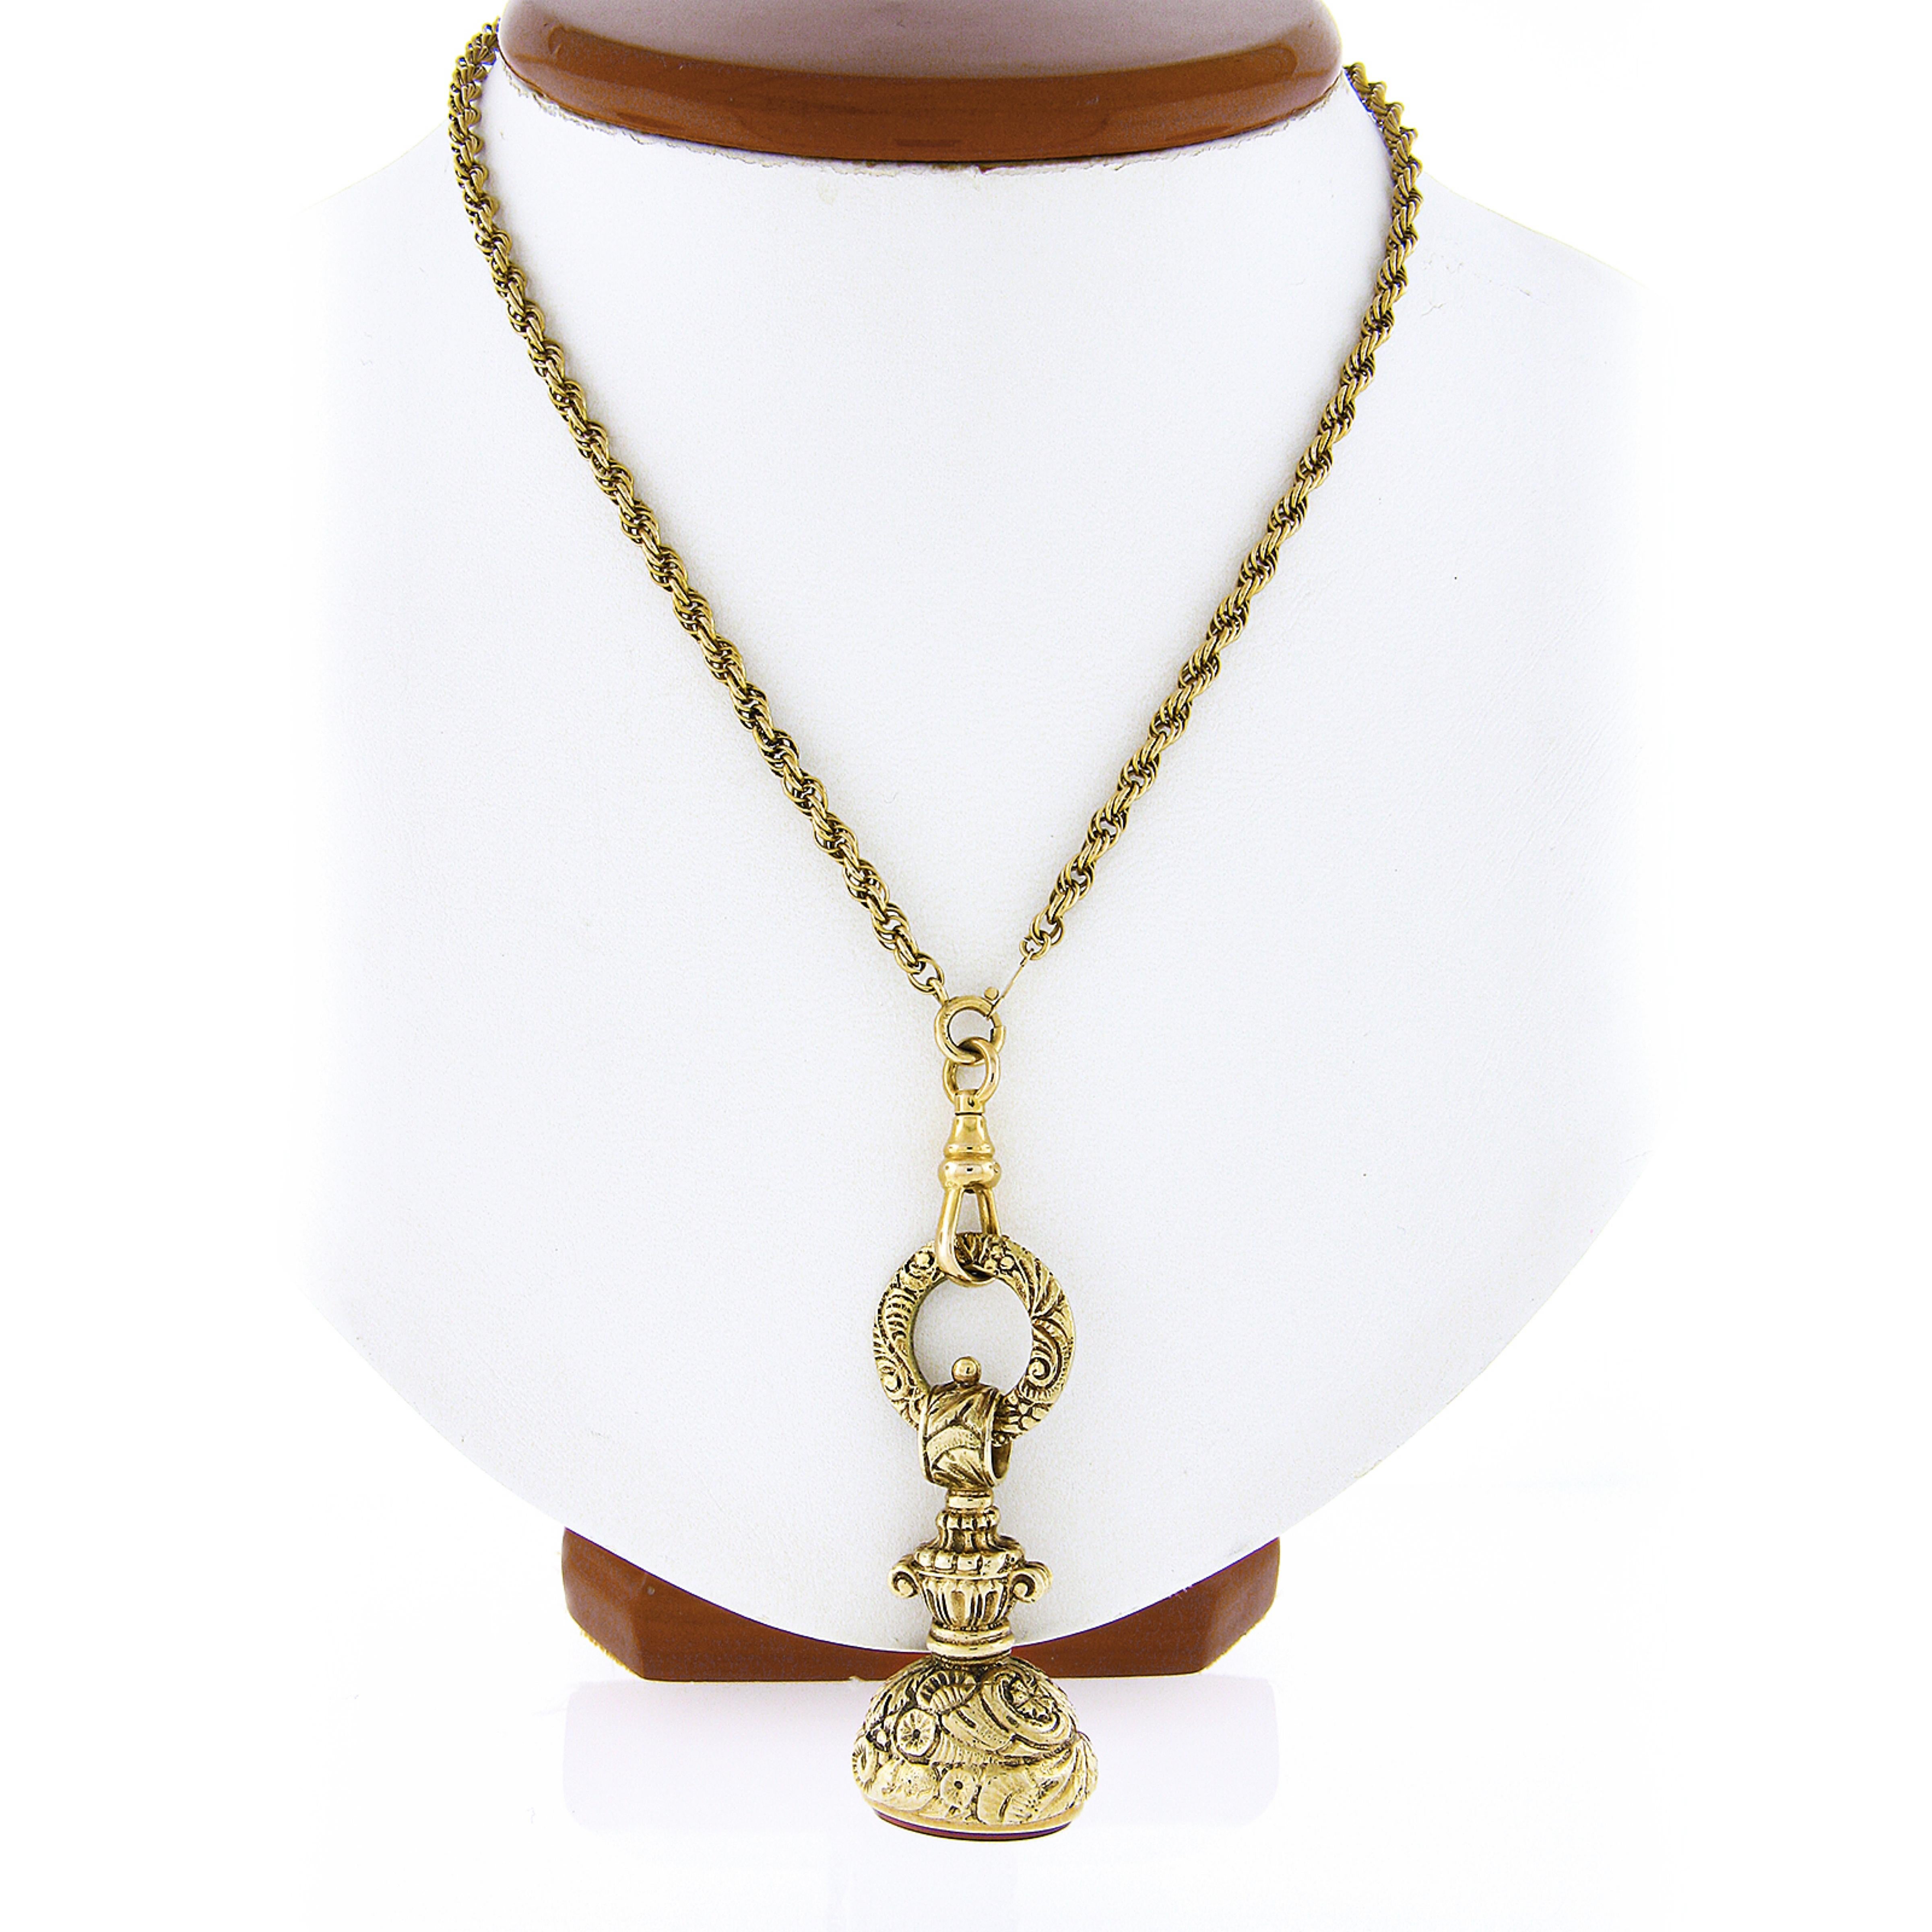 This gorgeous antique fob pendant was crafted from solid 14k yellow gold. It features an oval cut natural carnelian stone bezel set at its base displaying a wonderful rust red color. This exceptional fob is completely covered in very fine and ornate